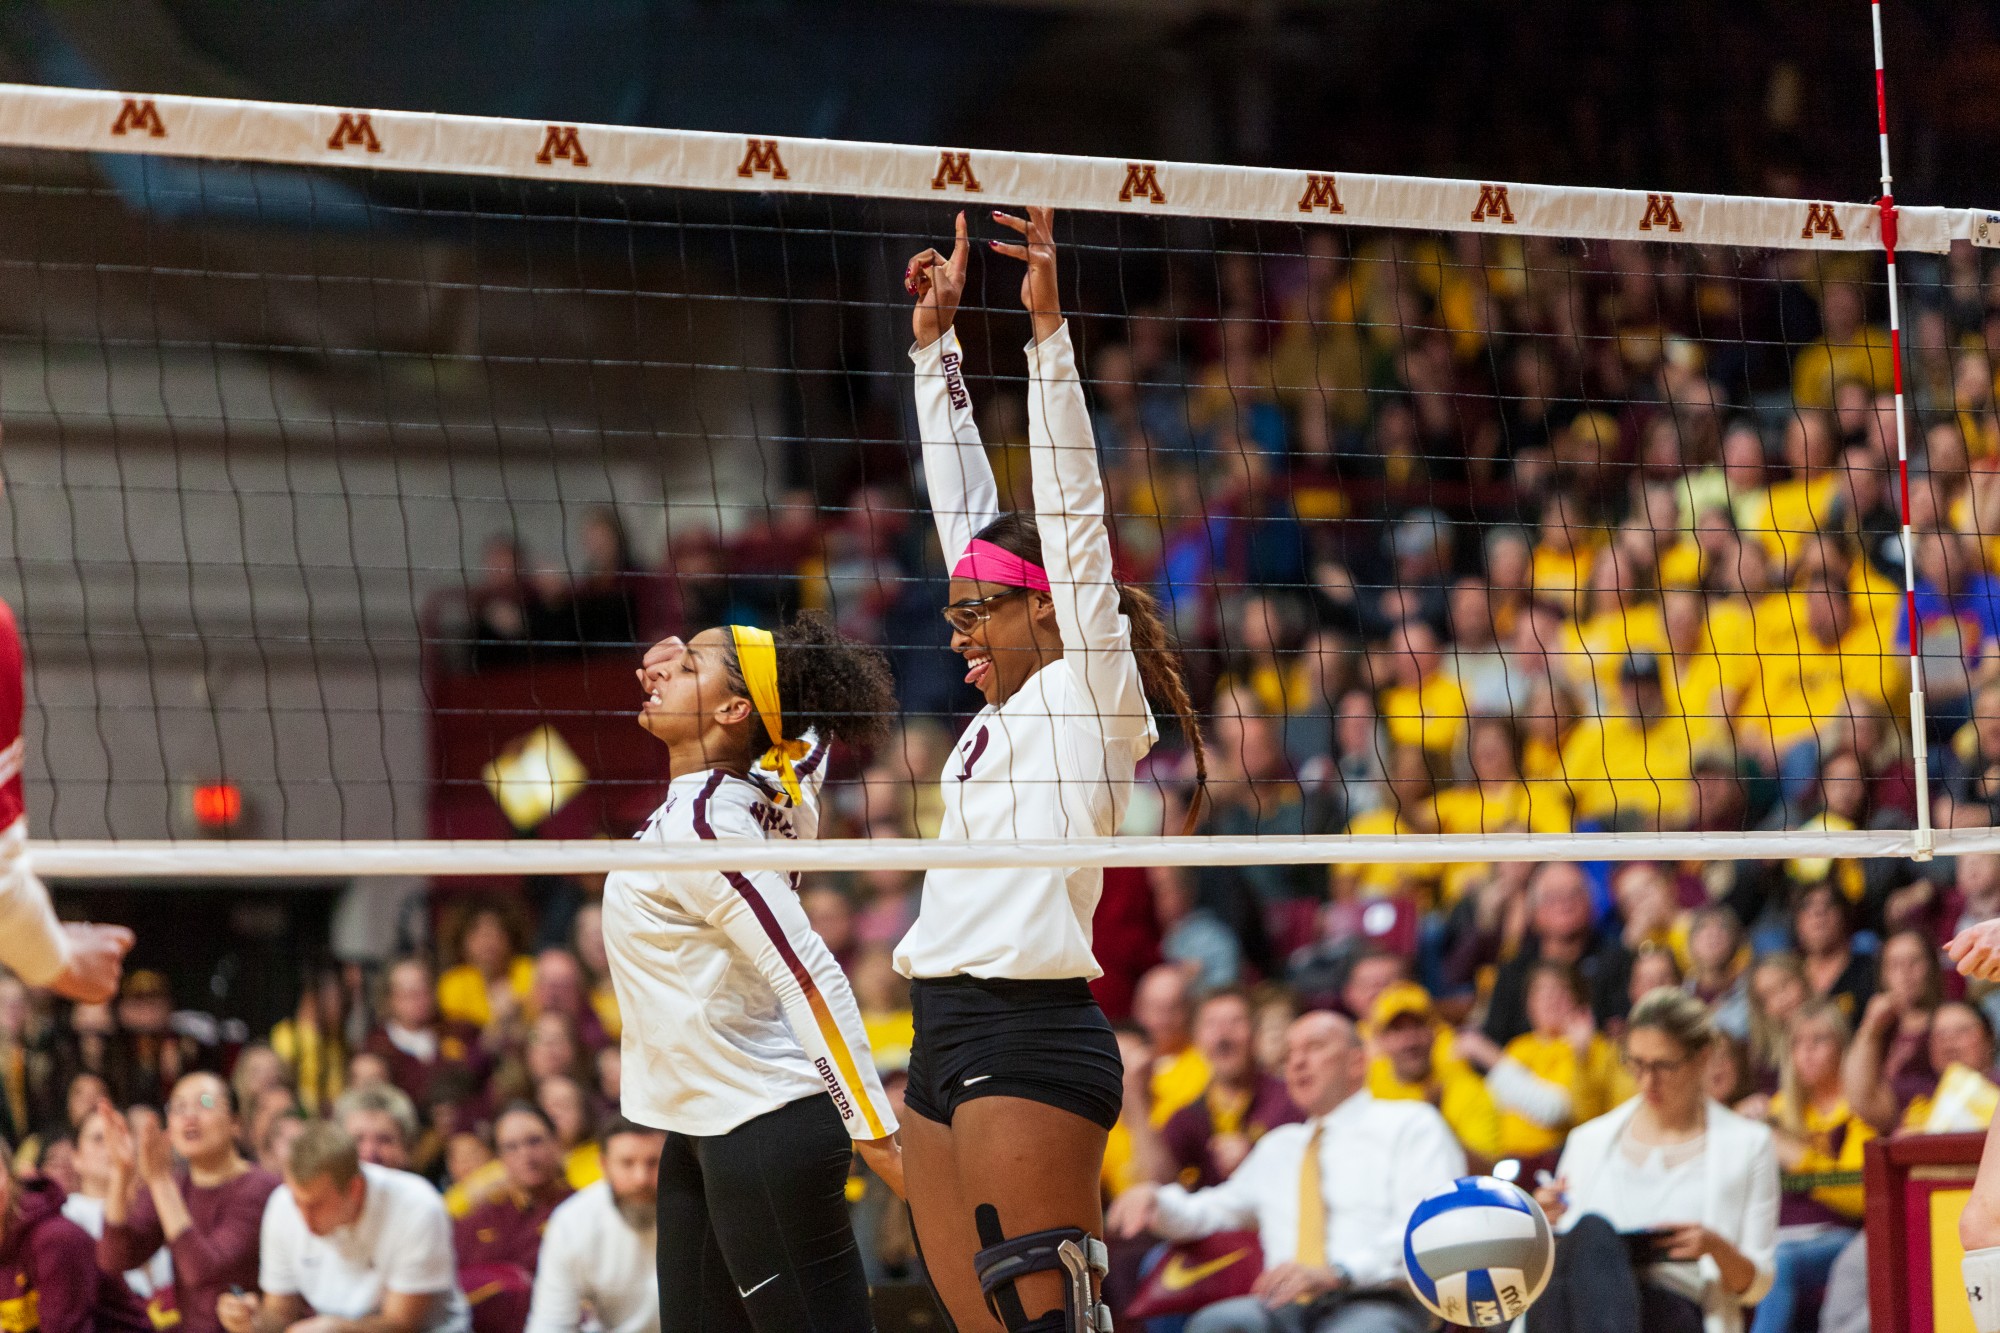 Middle Blocker Taylor Morgan celebrates a point at the Maturi Pavilion on Thursday, Nov. 14. The Gophers ended the night with a 3-1 loss against the Badgers. 